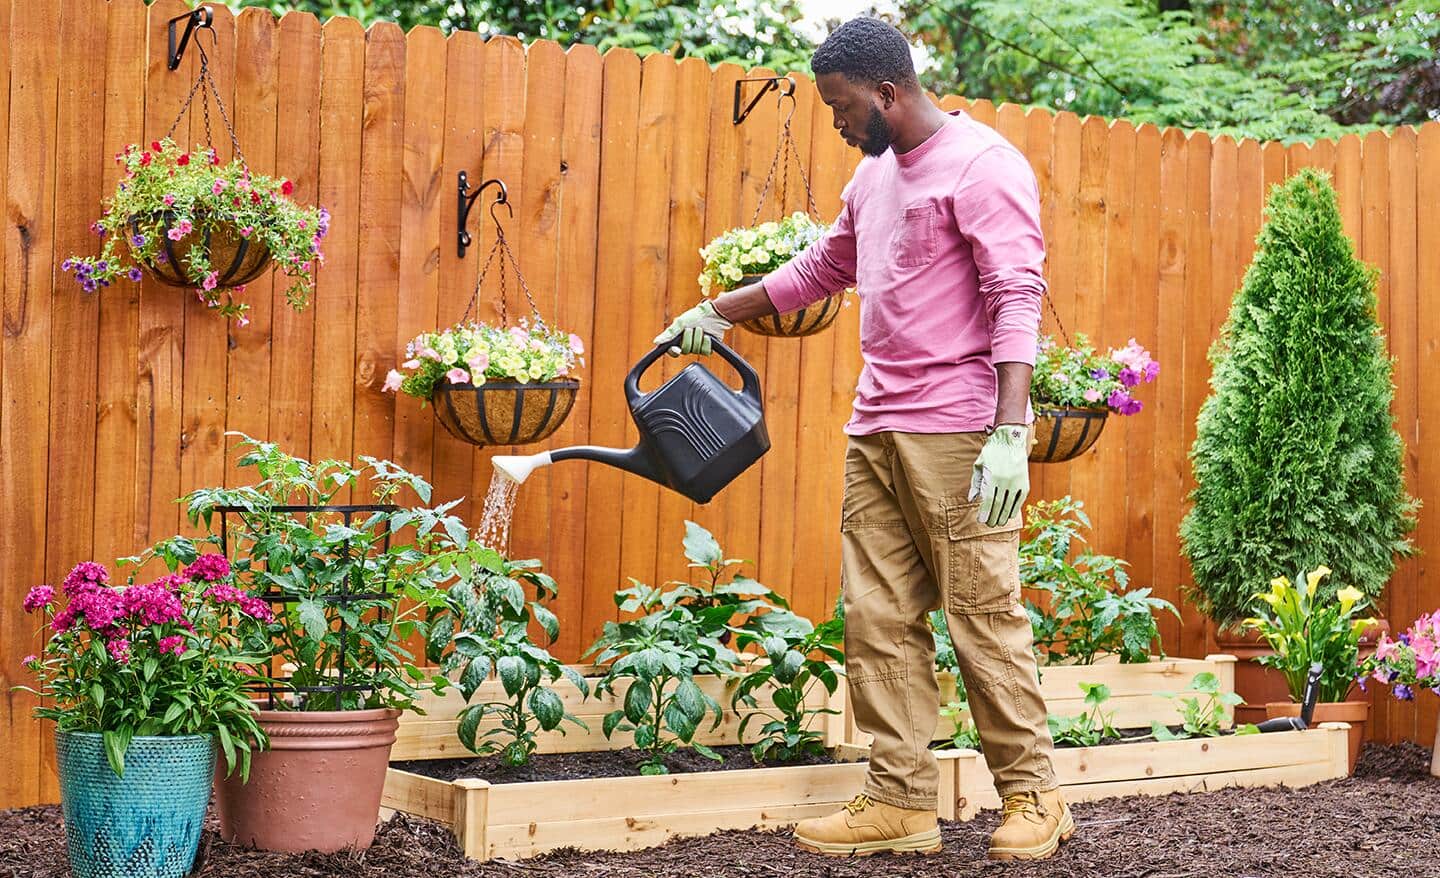 A gardener waters plants outdoors with a plastic watering can